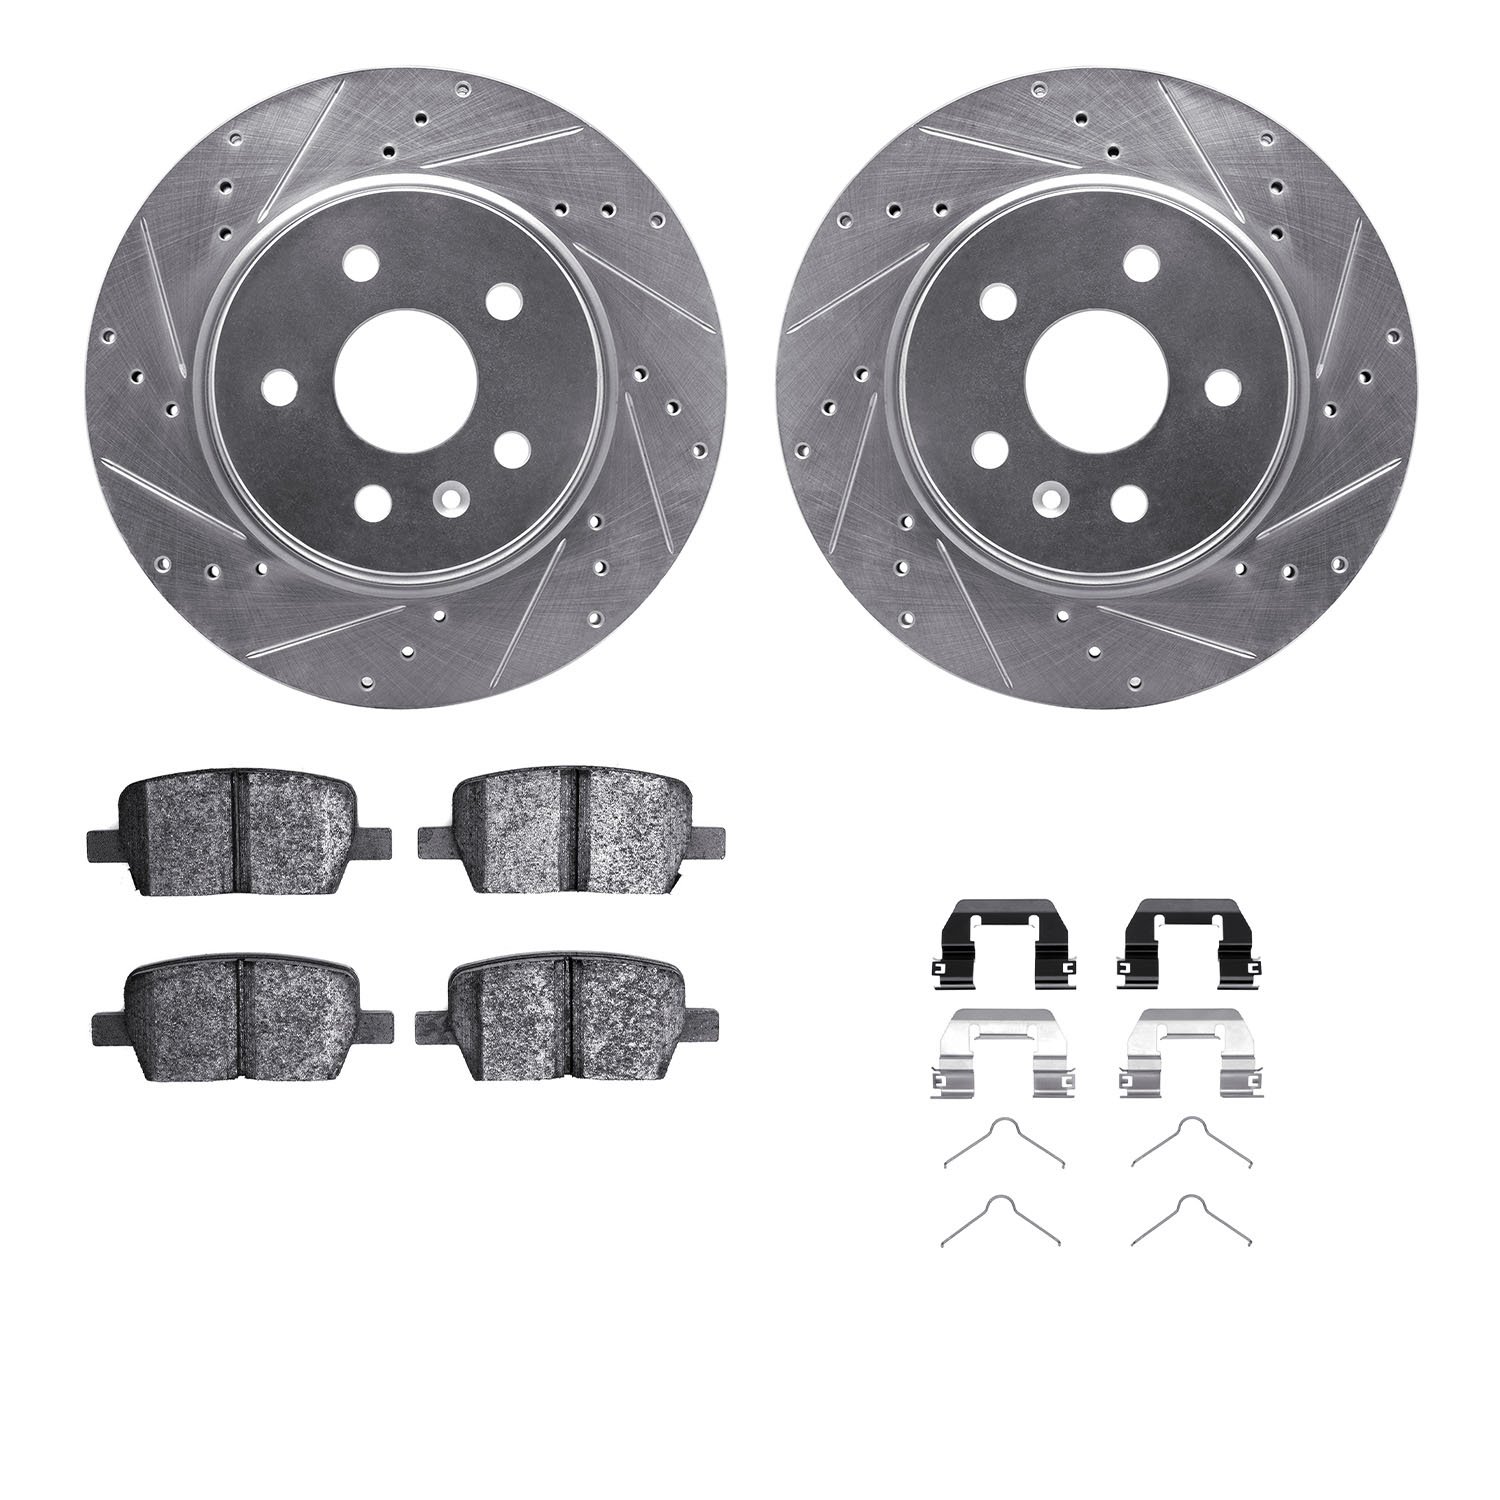 7312-65026 Drilled/Slotted Brake Rotor with 3000-Series Ceramic Brake Pads Kit & Hardware [Silver], Fits Select GM, Position: Re